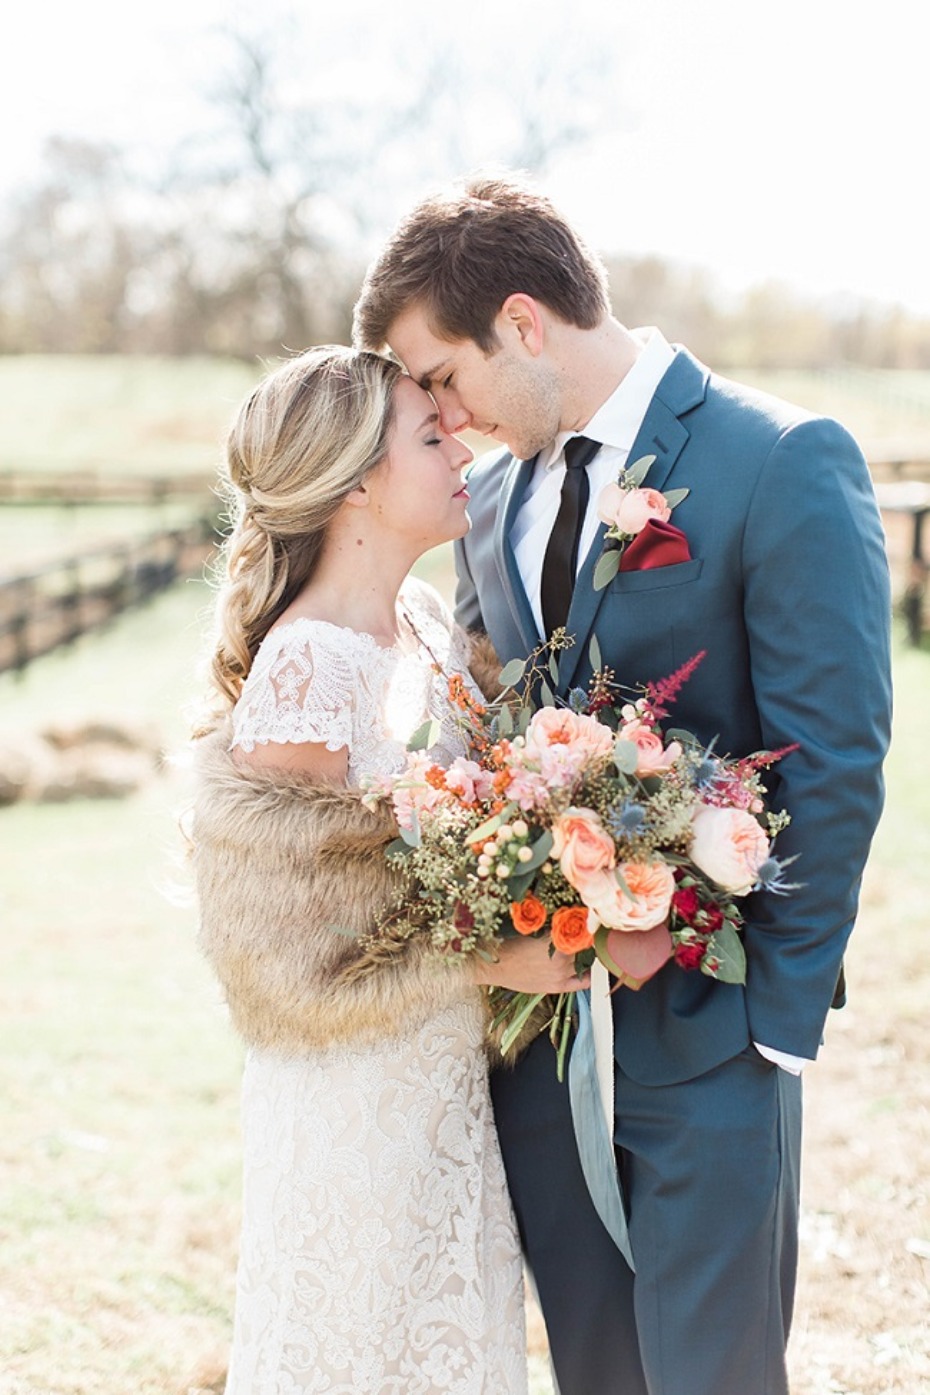 Candice Adelle Photography for Fox Chase Farm Styled Shoot